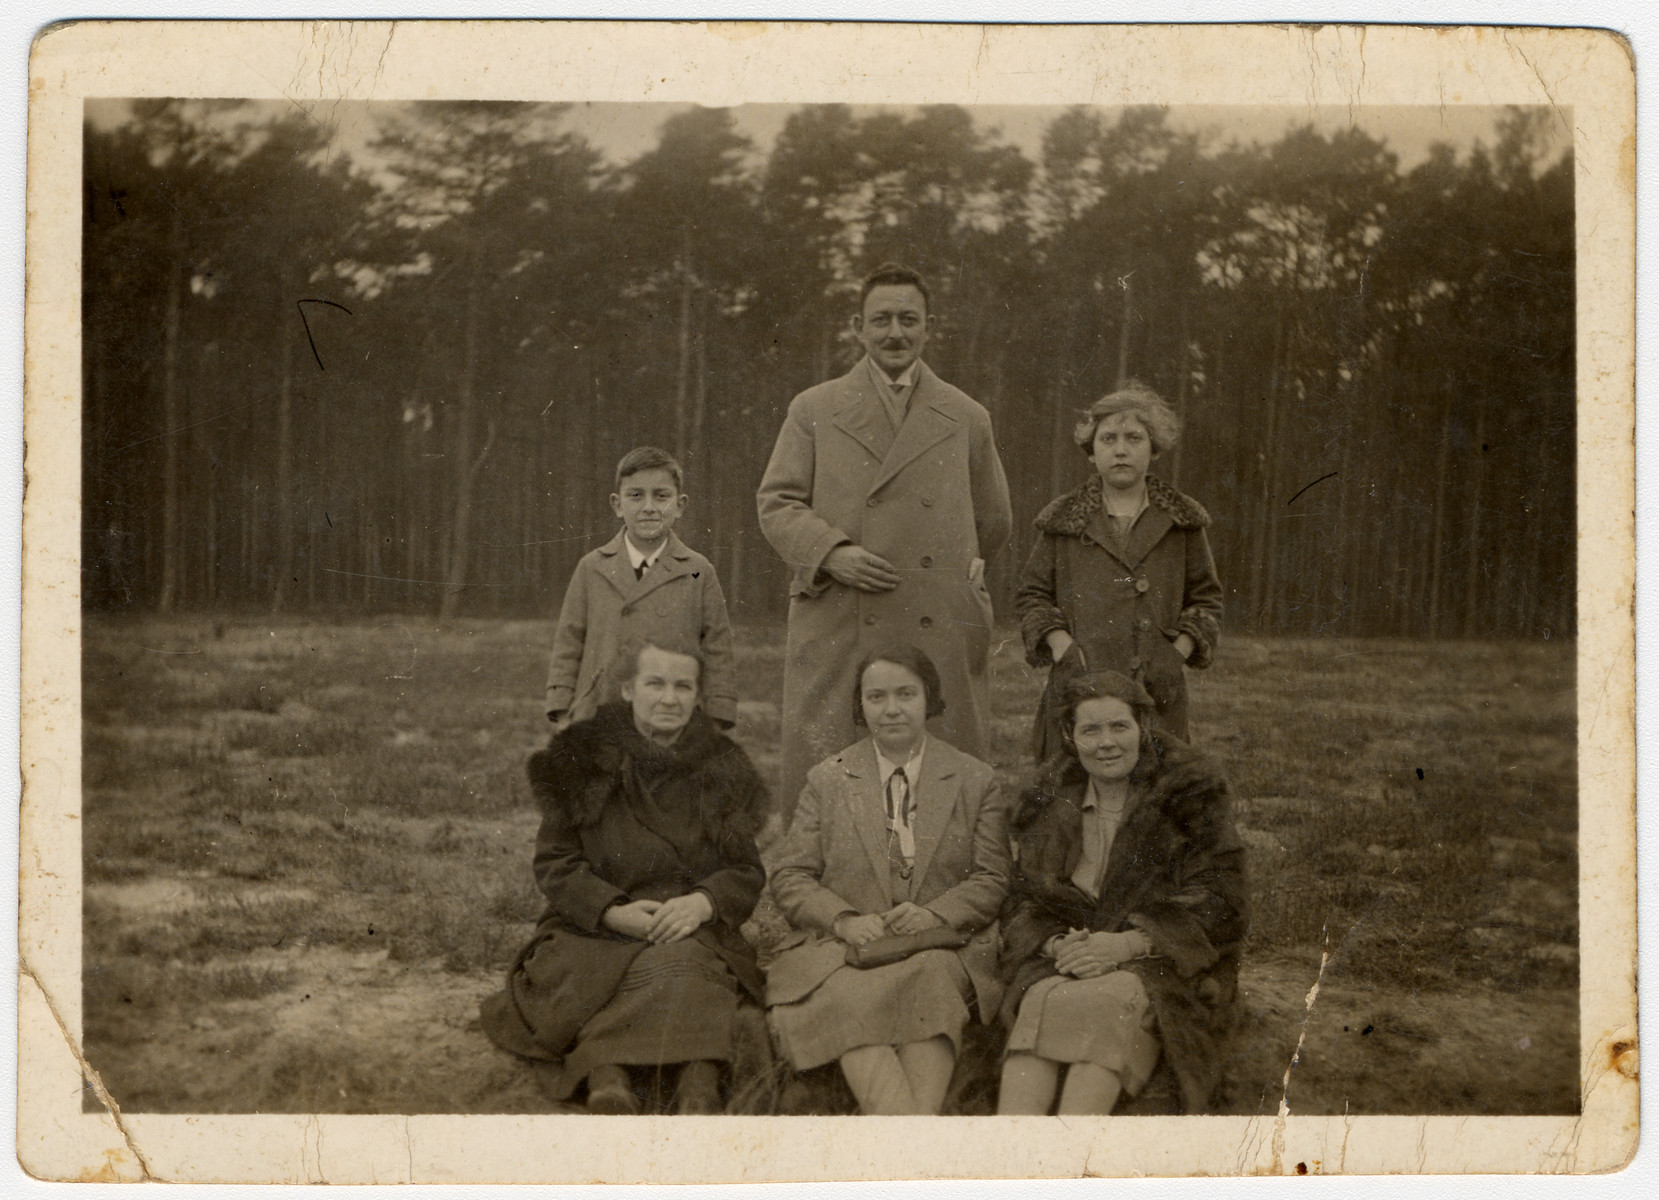 Standing from left to right are Hans, Max, and Ilse Hanauer.  Below them (from left to right) sit Marie Teske, Frieda Hanauer, and an unknown woman.  The family is posing in front of a forest.